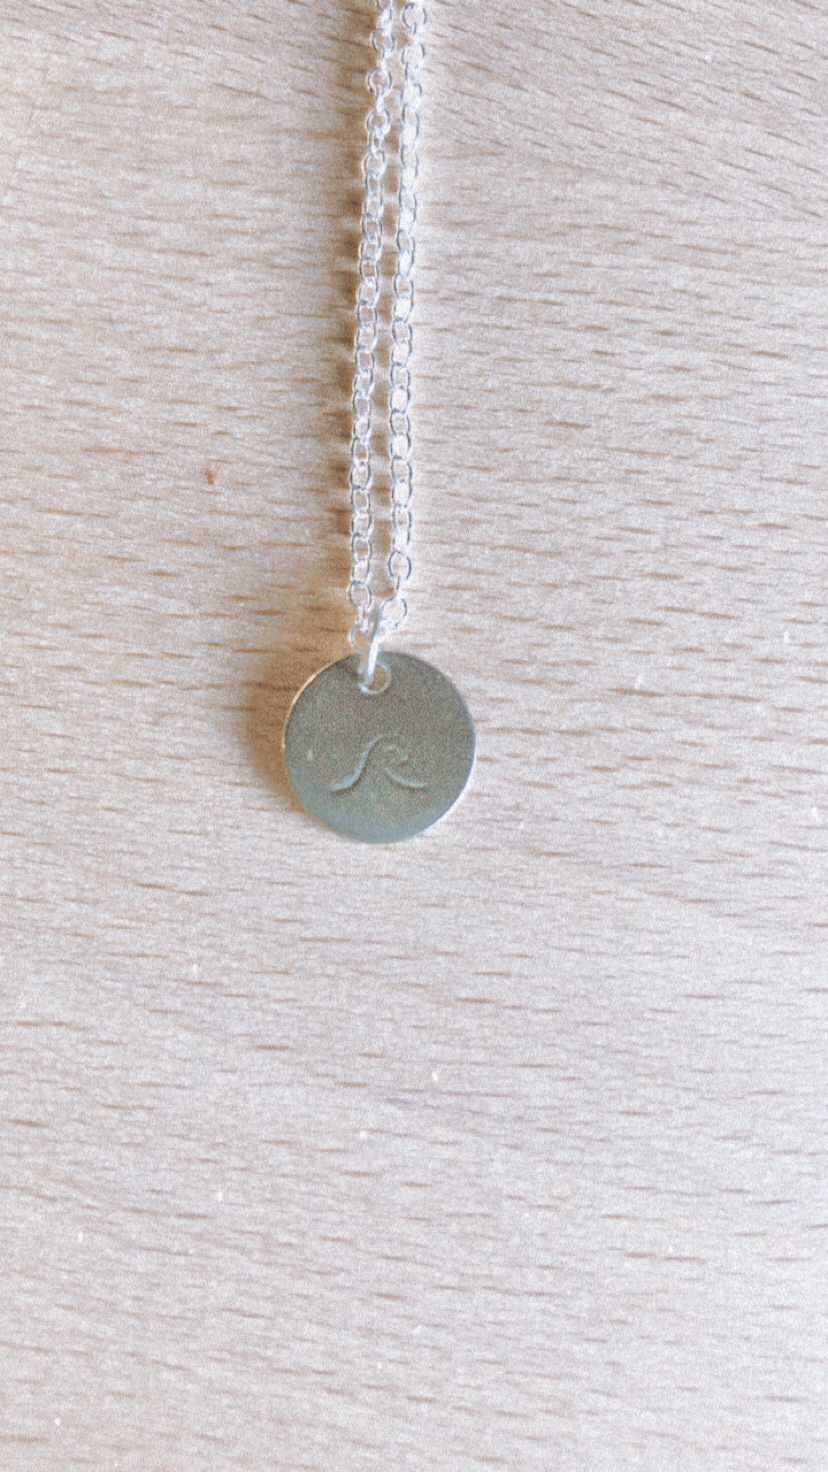 Adventure Stamp Necklace - Hand Stamped Women's Jewelry